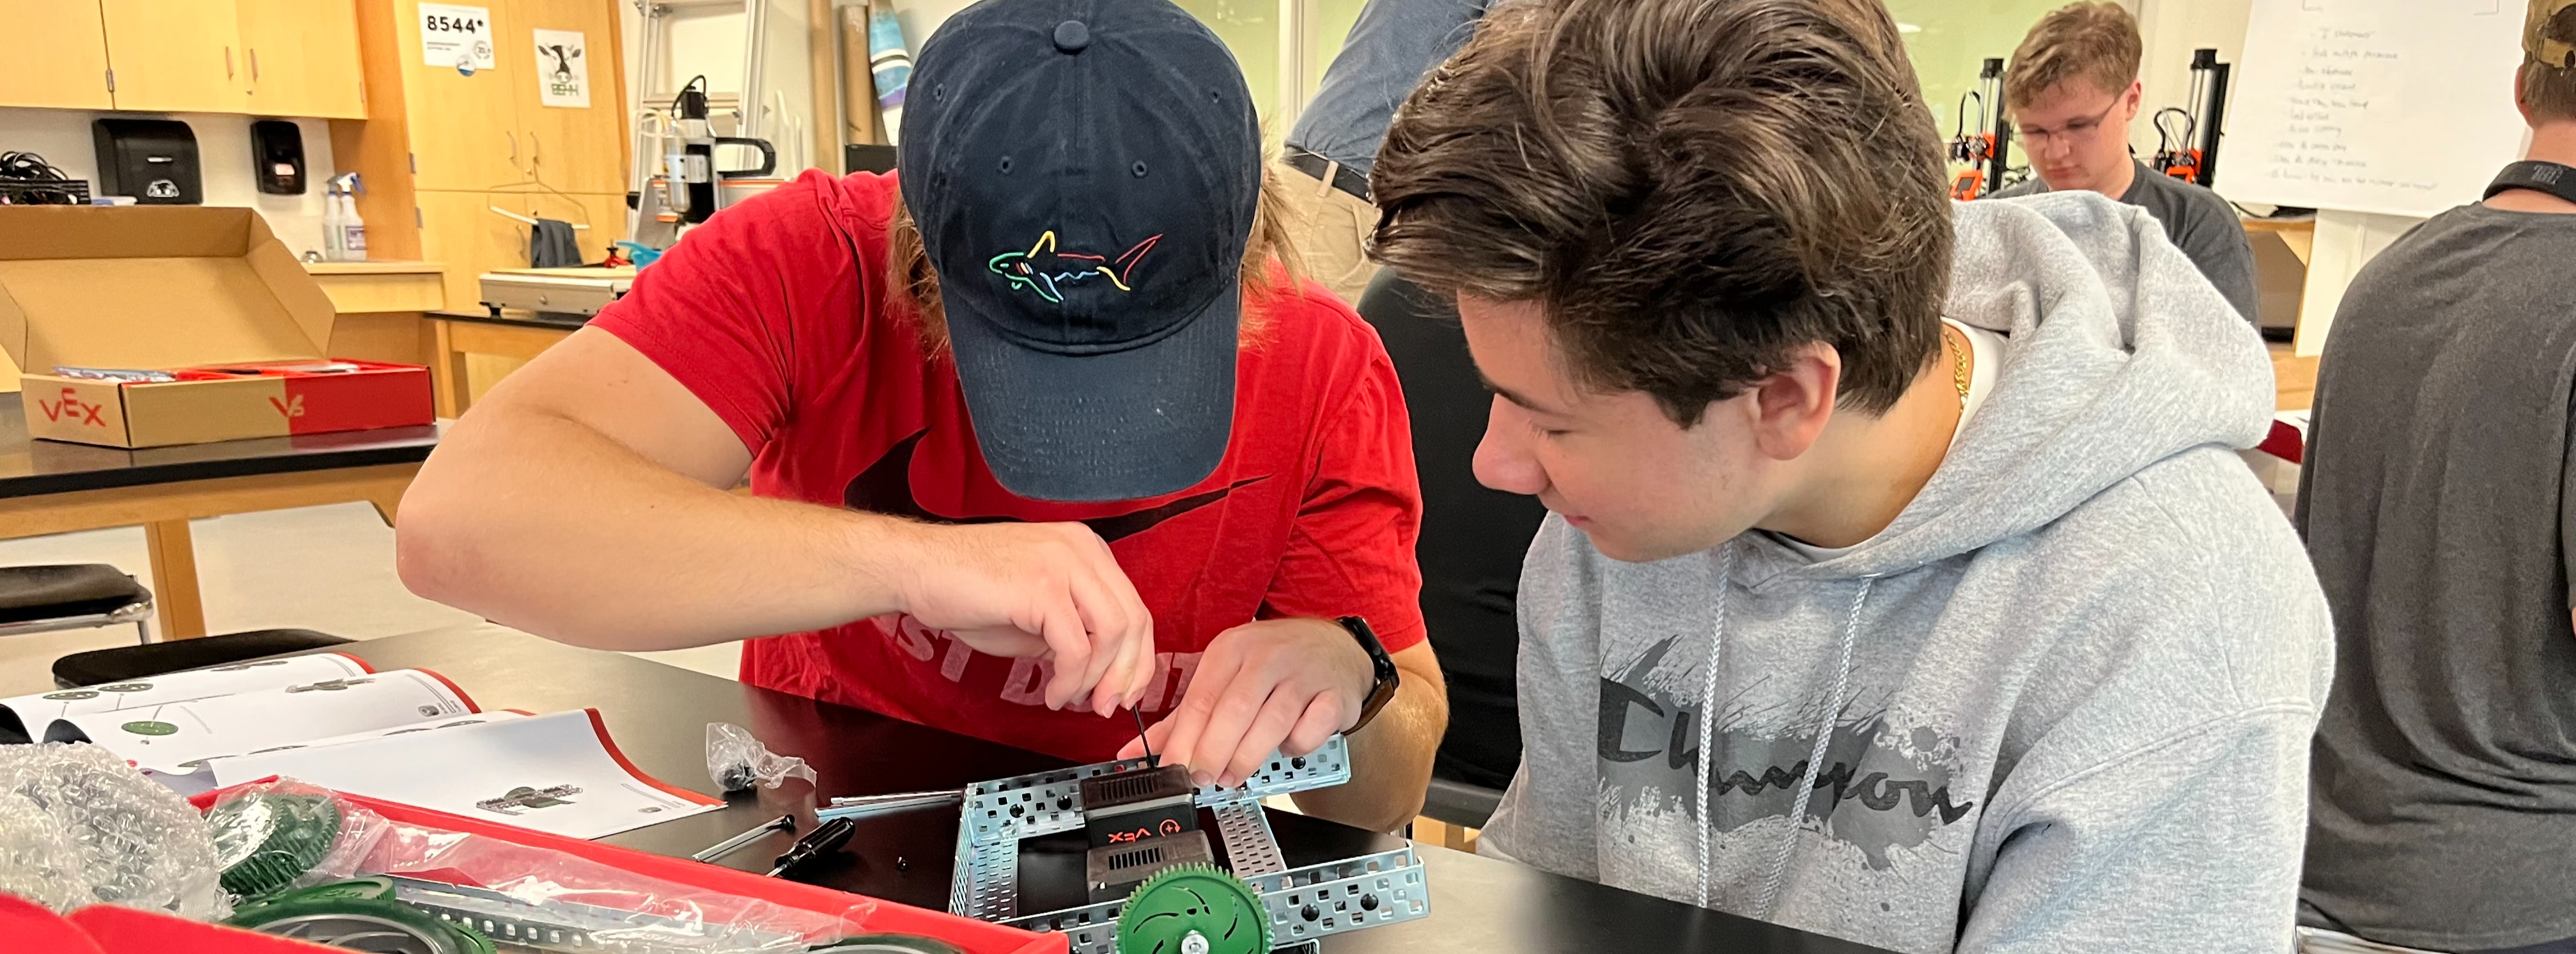 Two students working on robotics